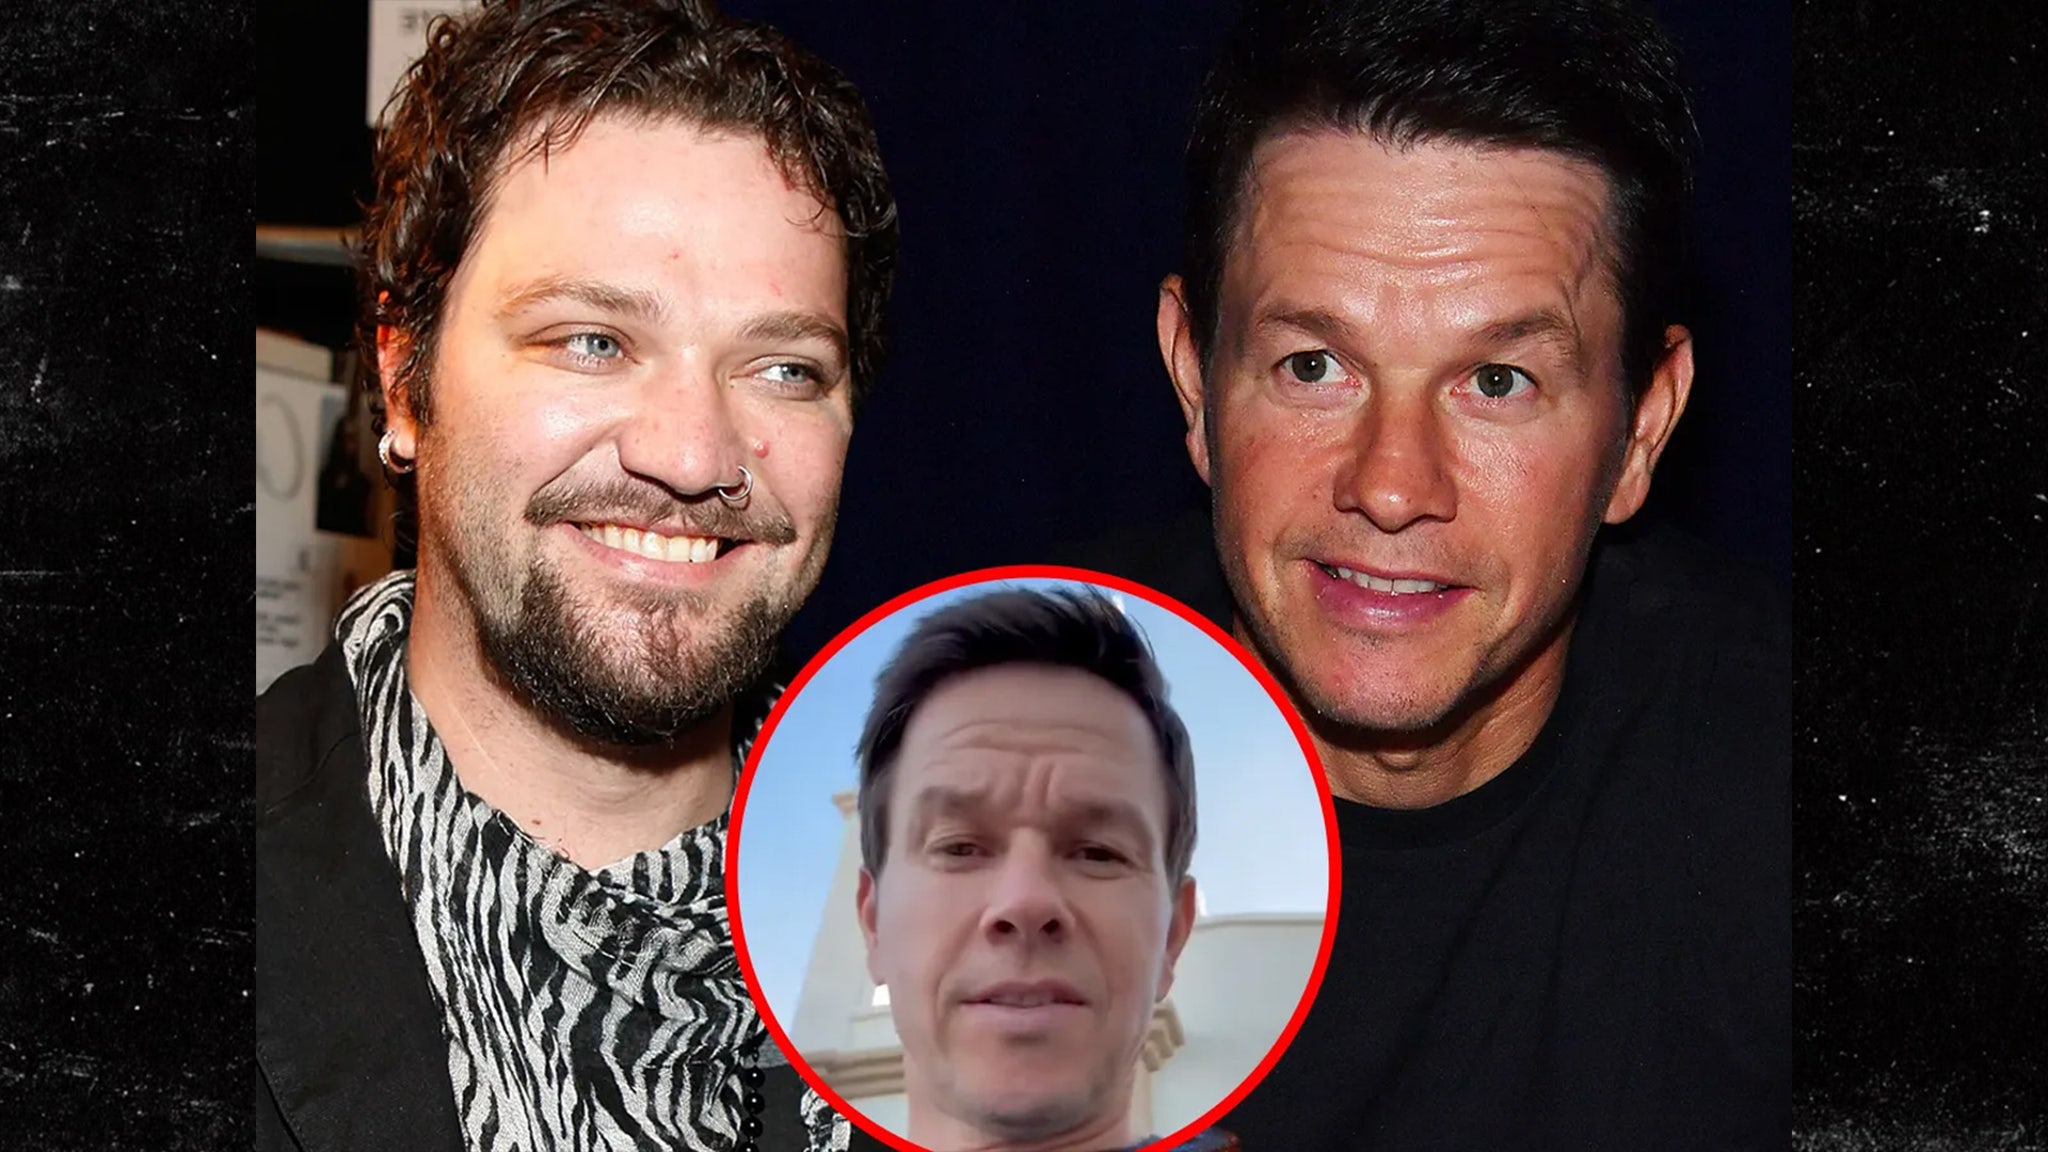 Bam Margera Says He’s Over 100 Days Sober, Gets Shoutout From Mark Wahlberg